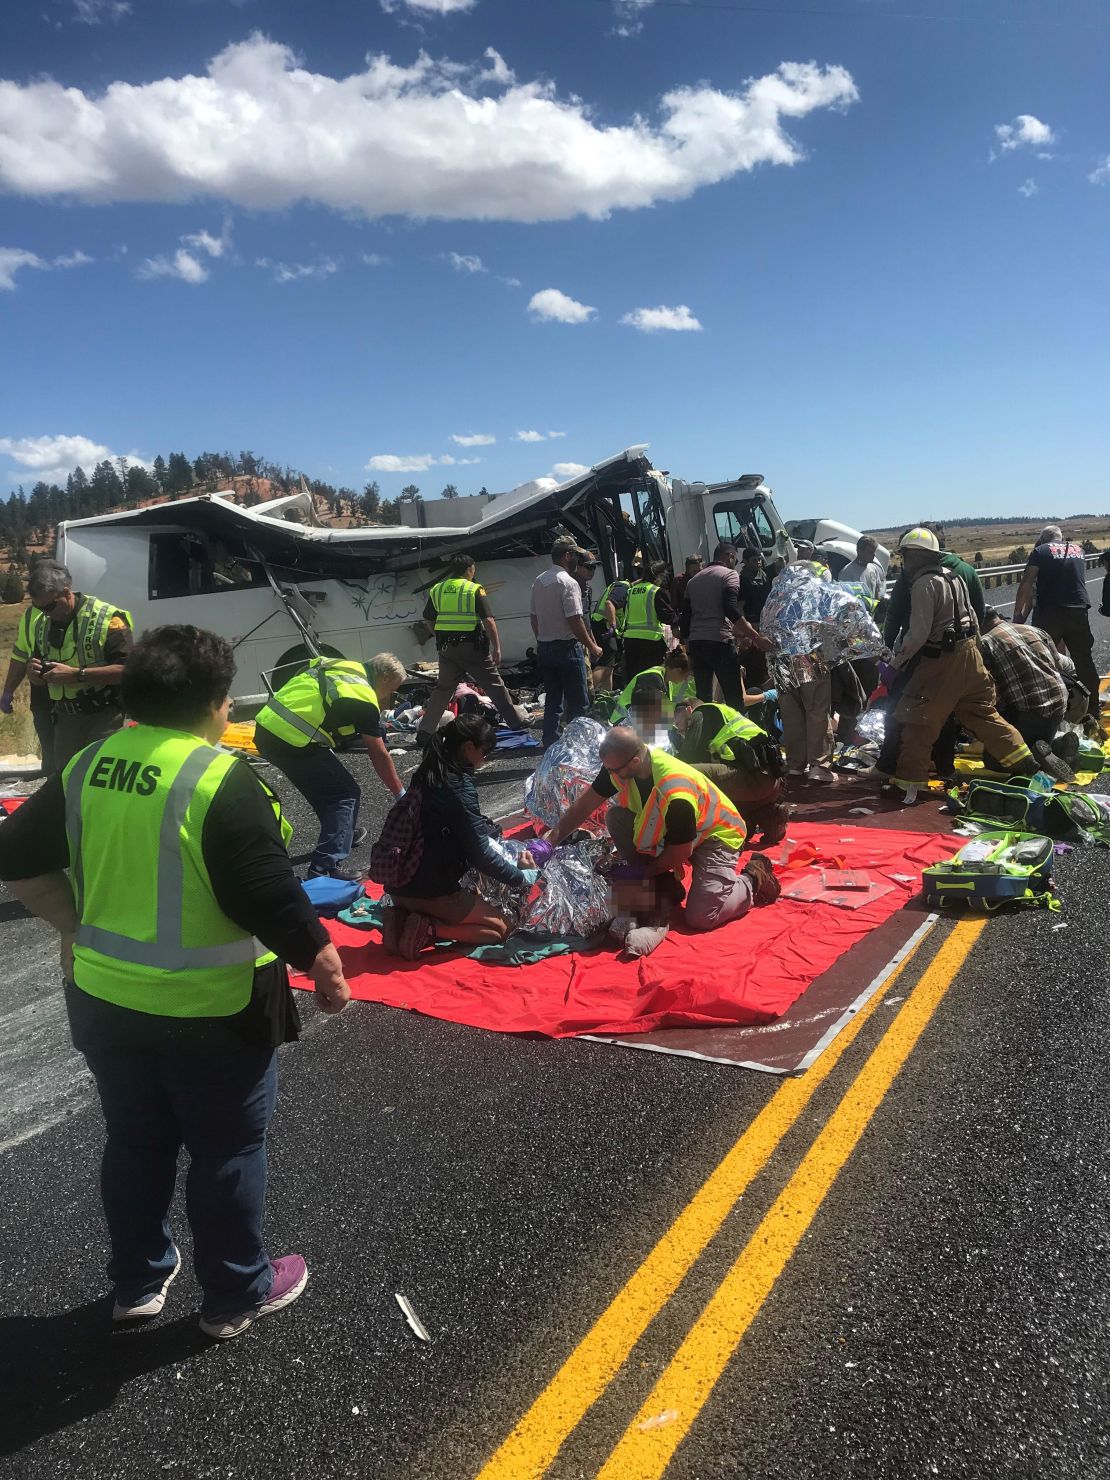 Some passengers suffered critical injuries during the crash. CNN has obscured parts of this image because the condition of the victims could not be verified. 